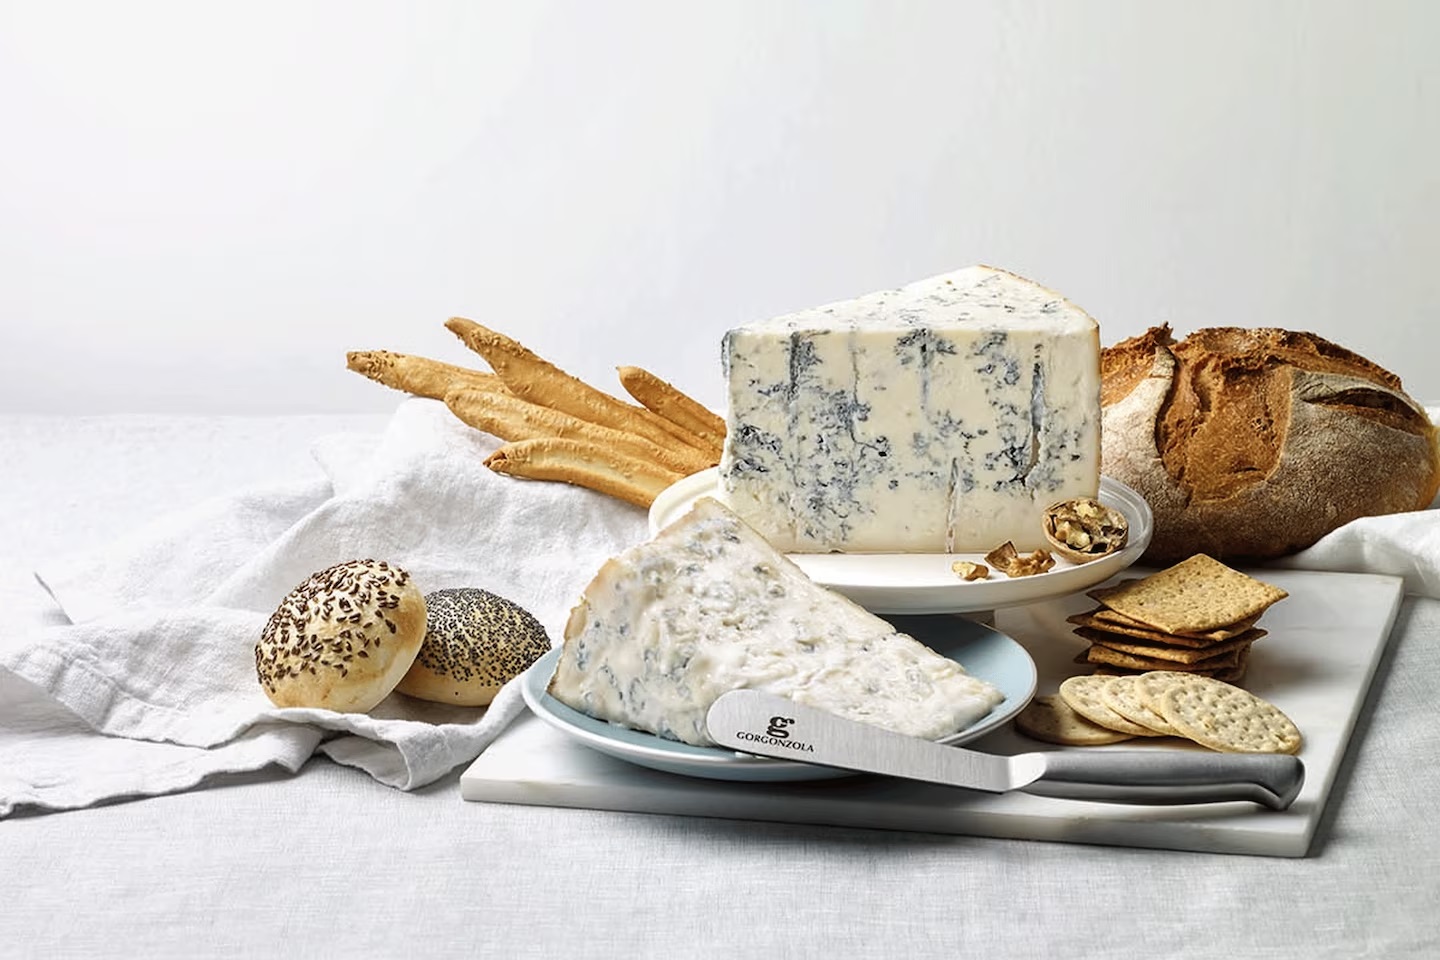 Gorgonzola: on the trail of Italy’s most prized cheese